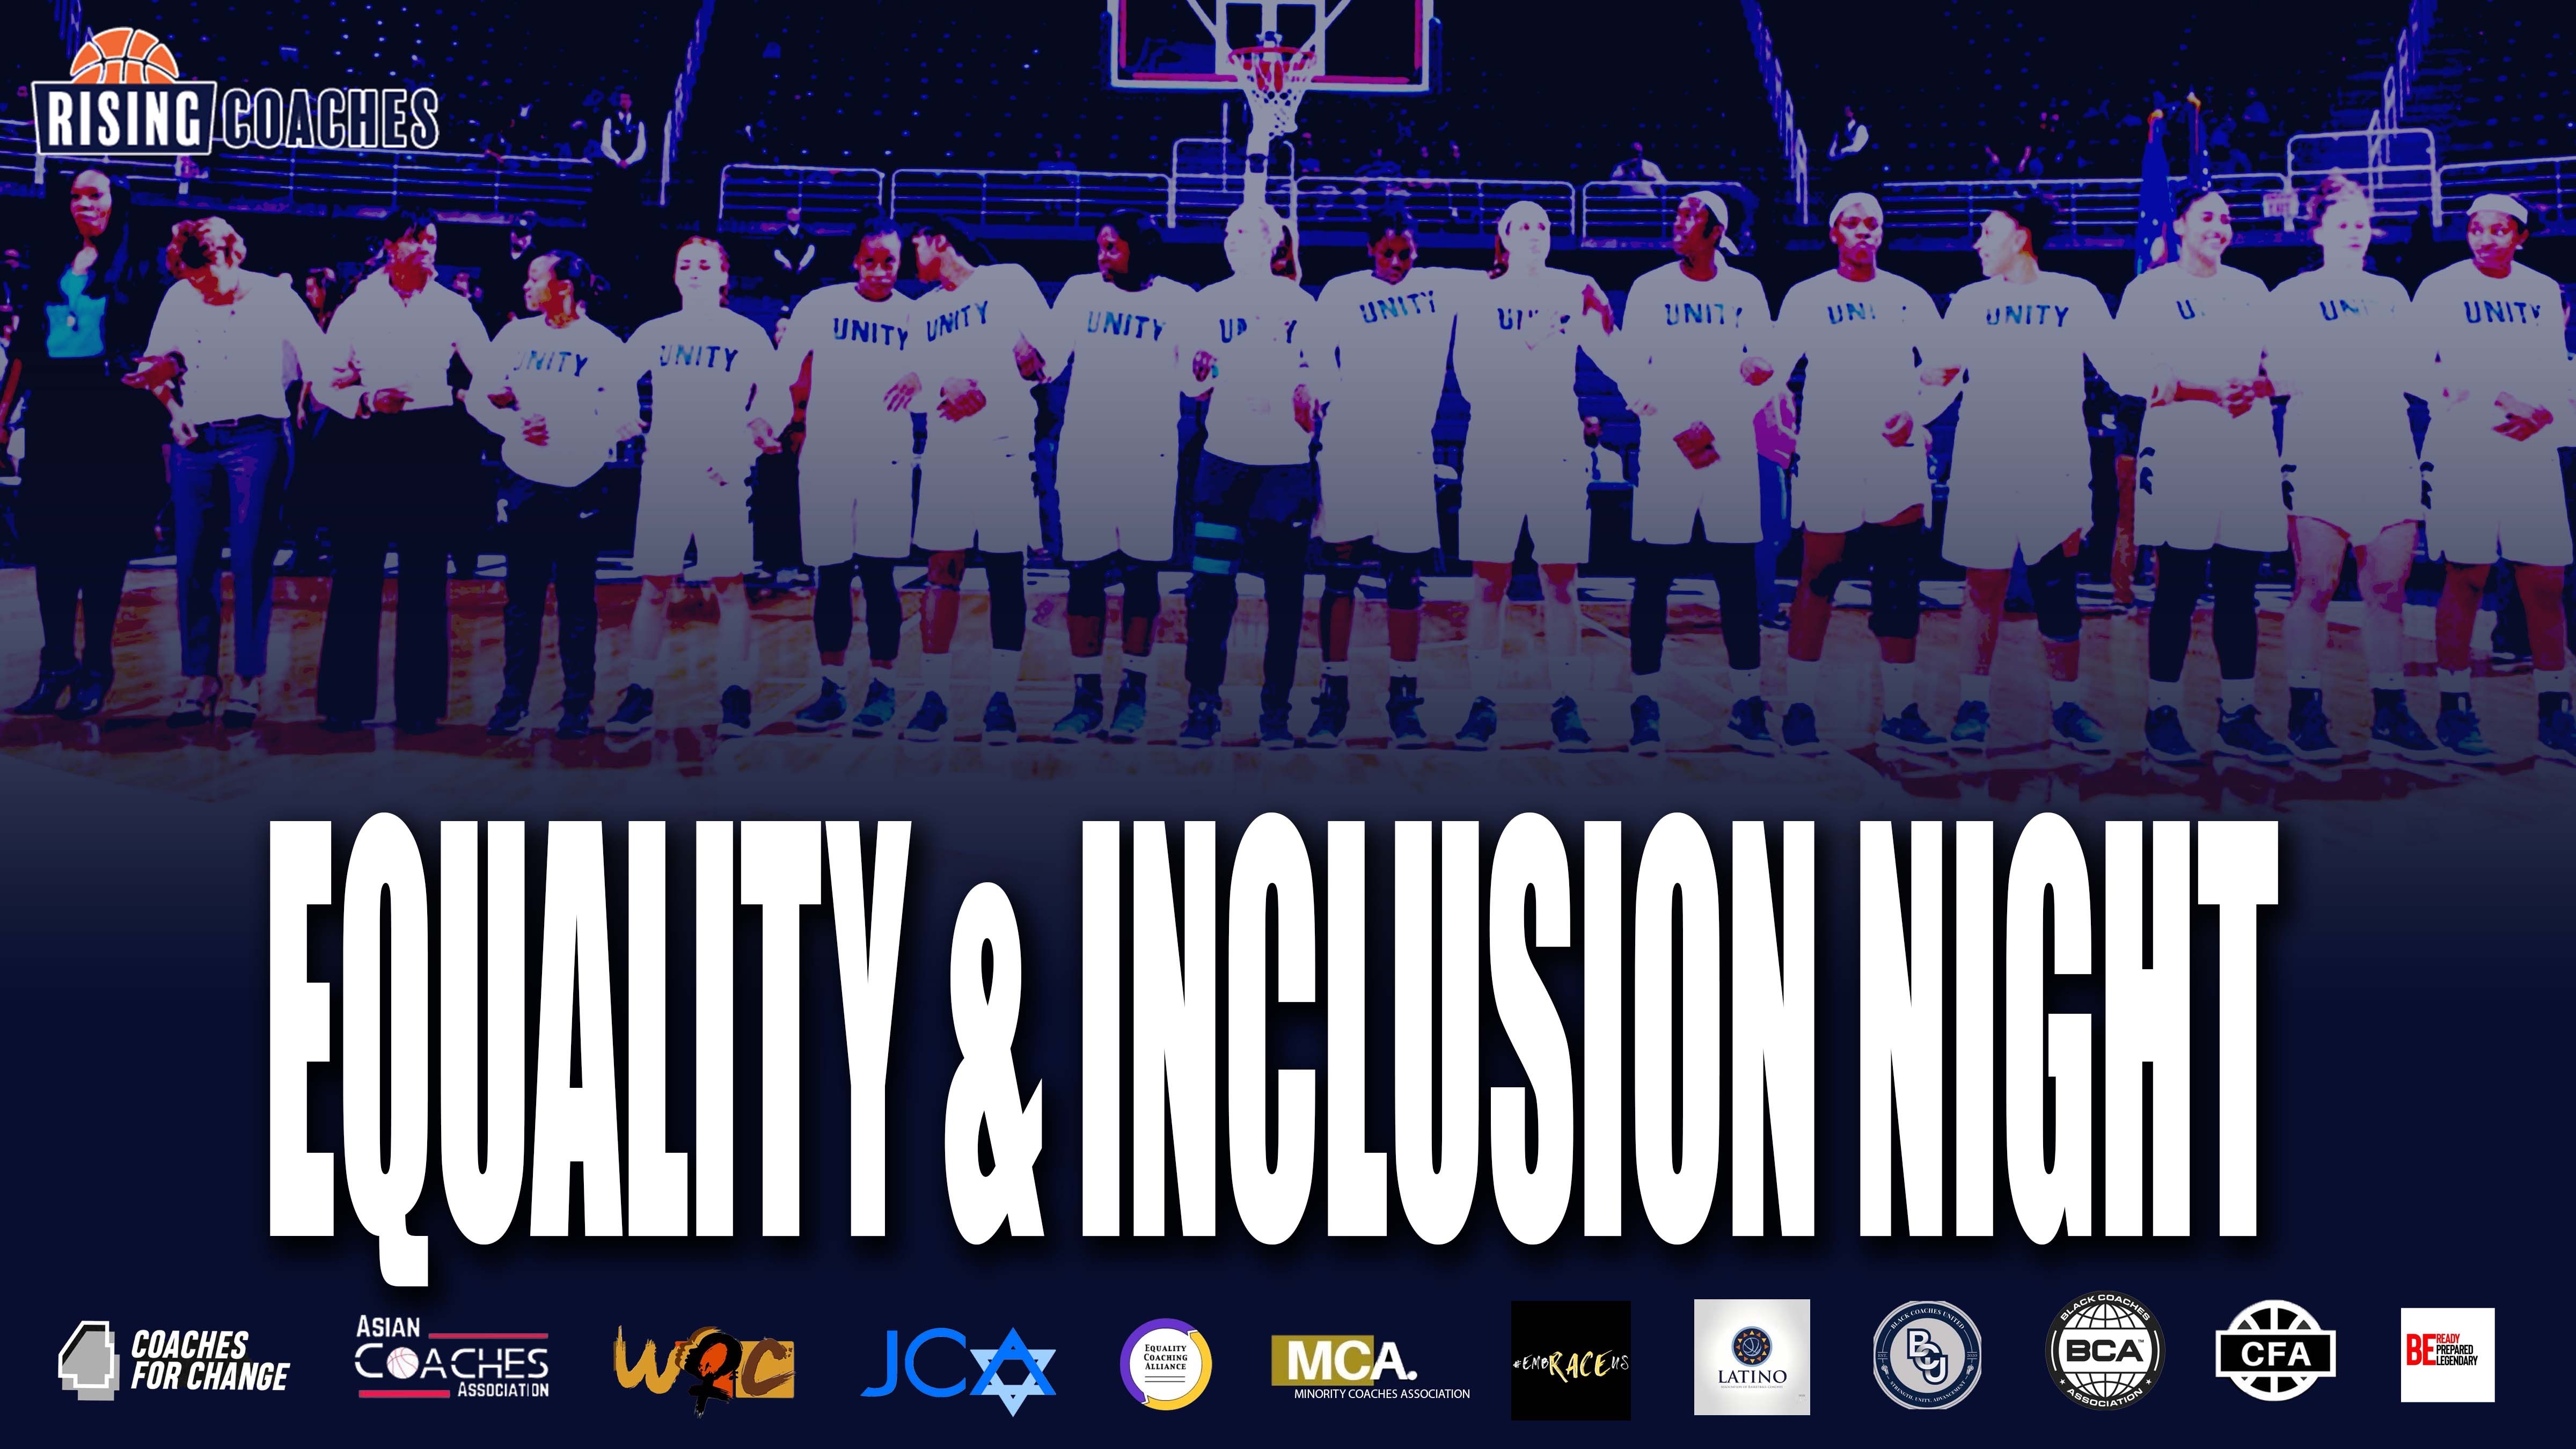 DEI Alliance Hosts Equality & Inclusion Night Throughout College Basketball